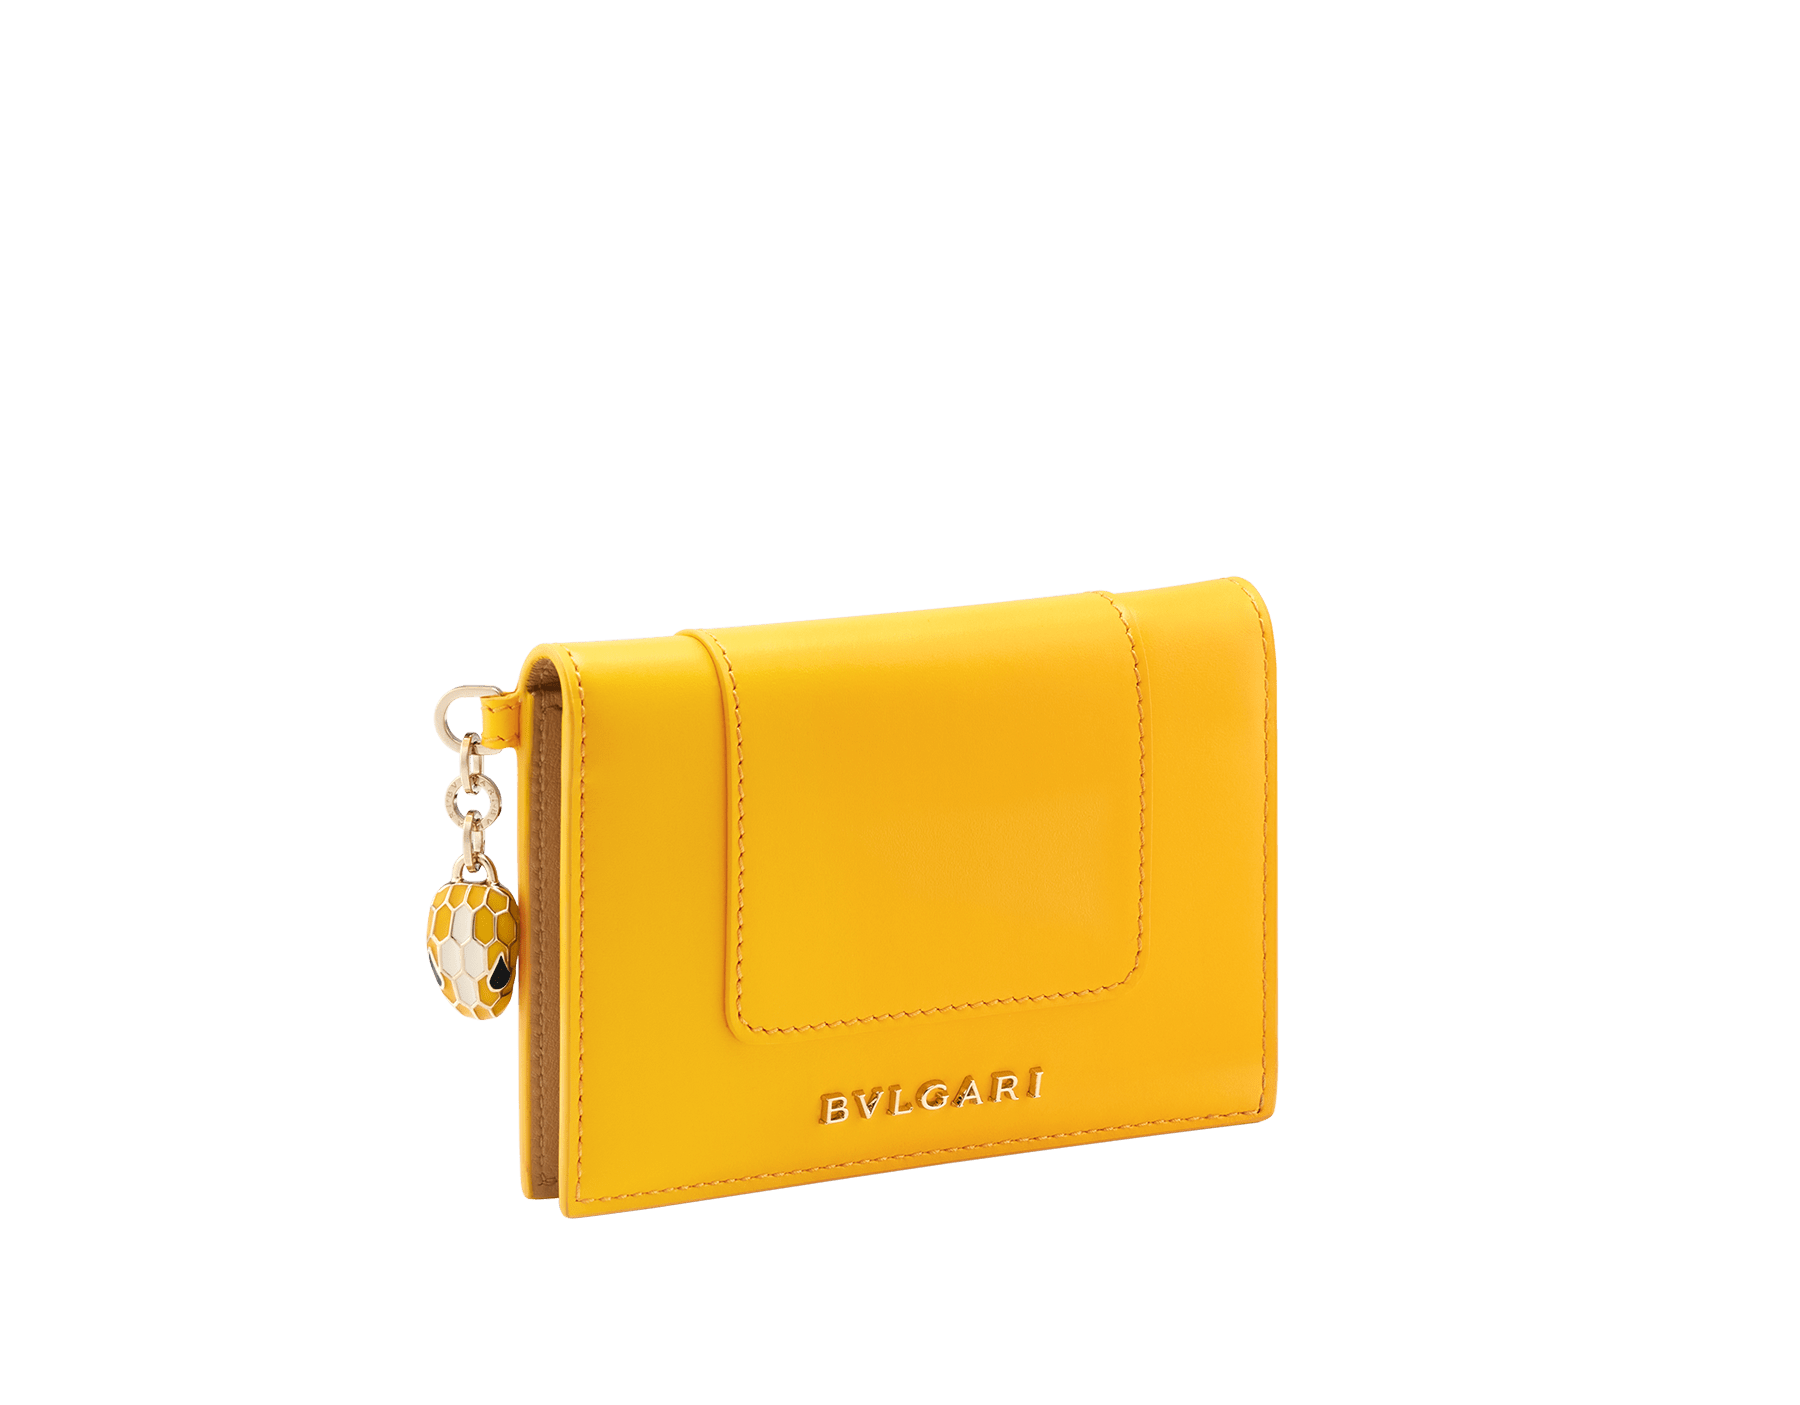 Serpenti Forever folded card holder in coral carnelian orange calf leather with flamingo quartz pink nappa leather interior. Captivating light gold-plated brass snakehead charm with red enamel eyes, and press-stud closure. SEA-CC-HOLDER-FOLD-Cla image 1